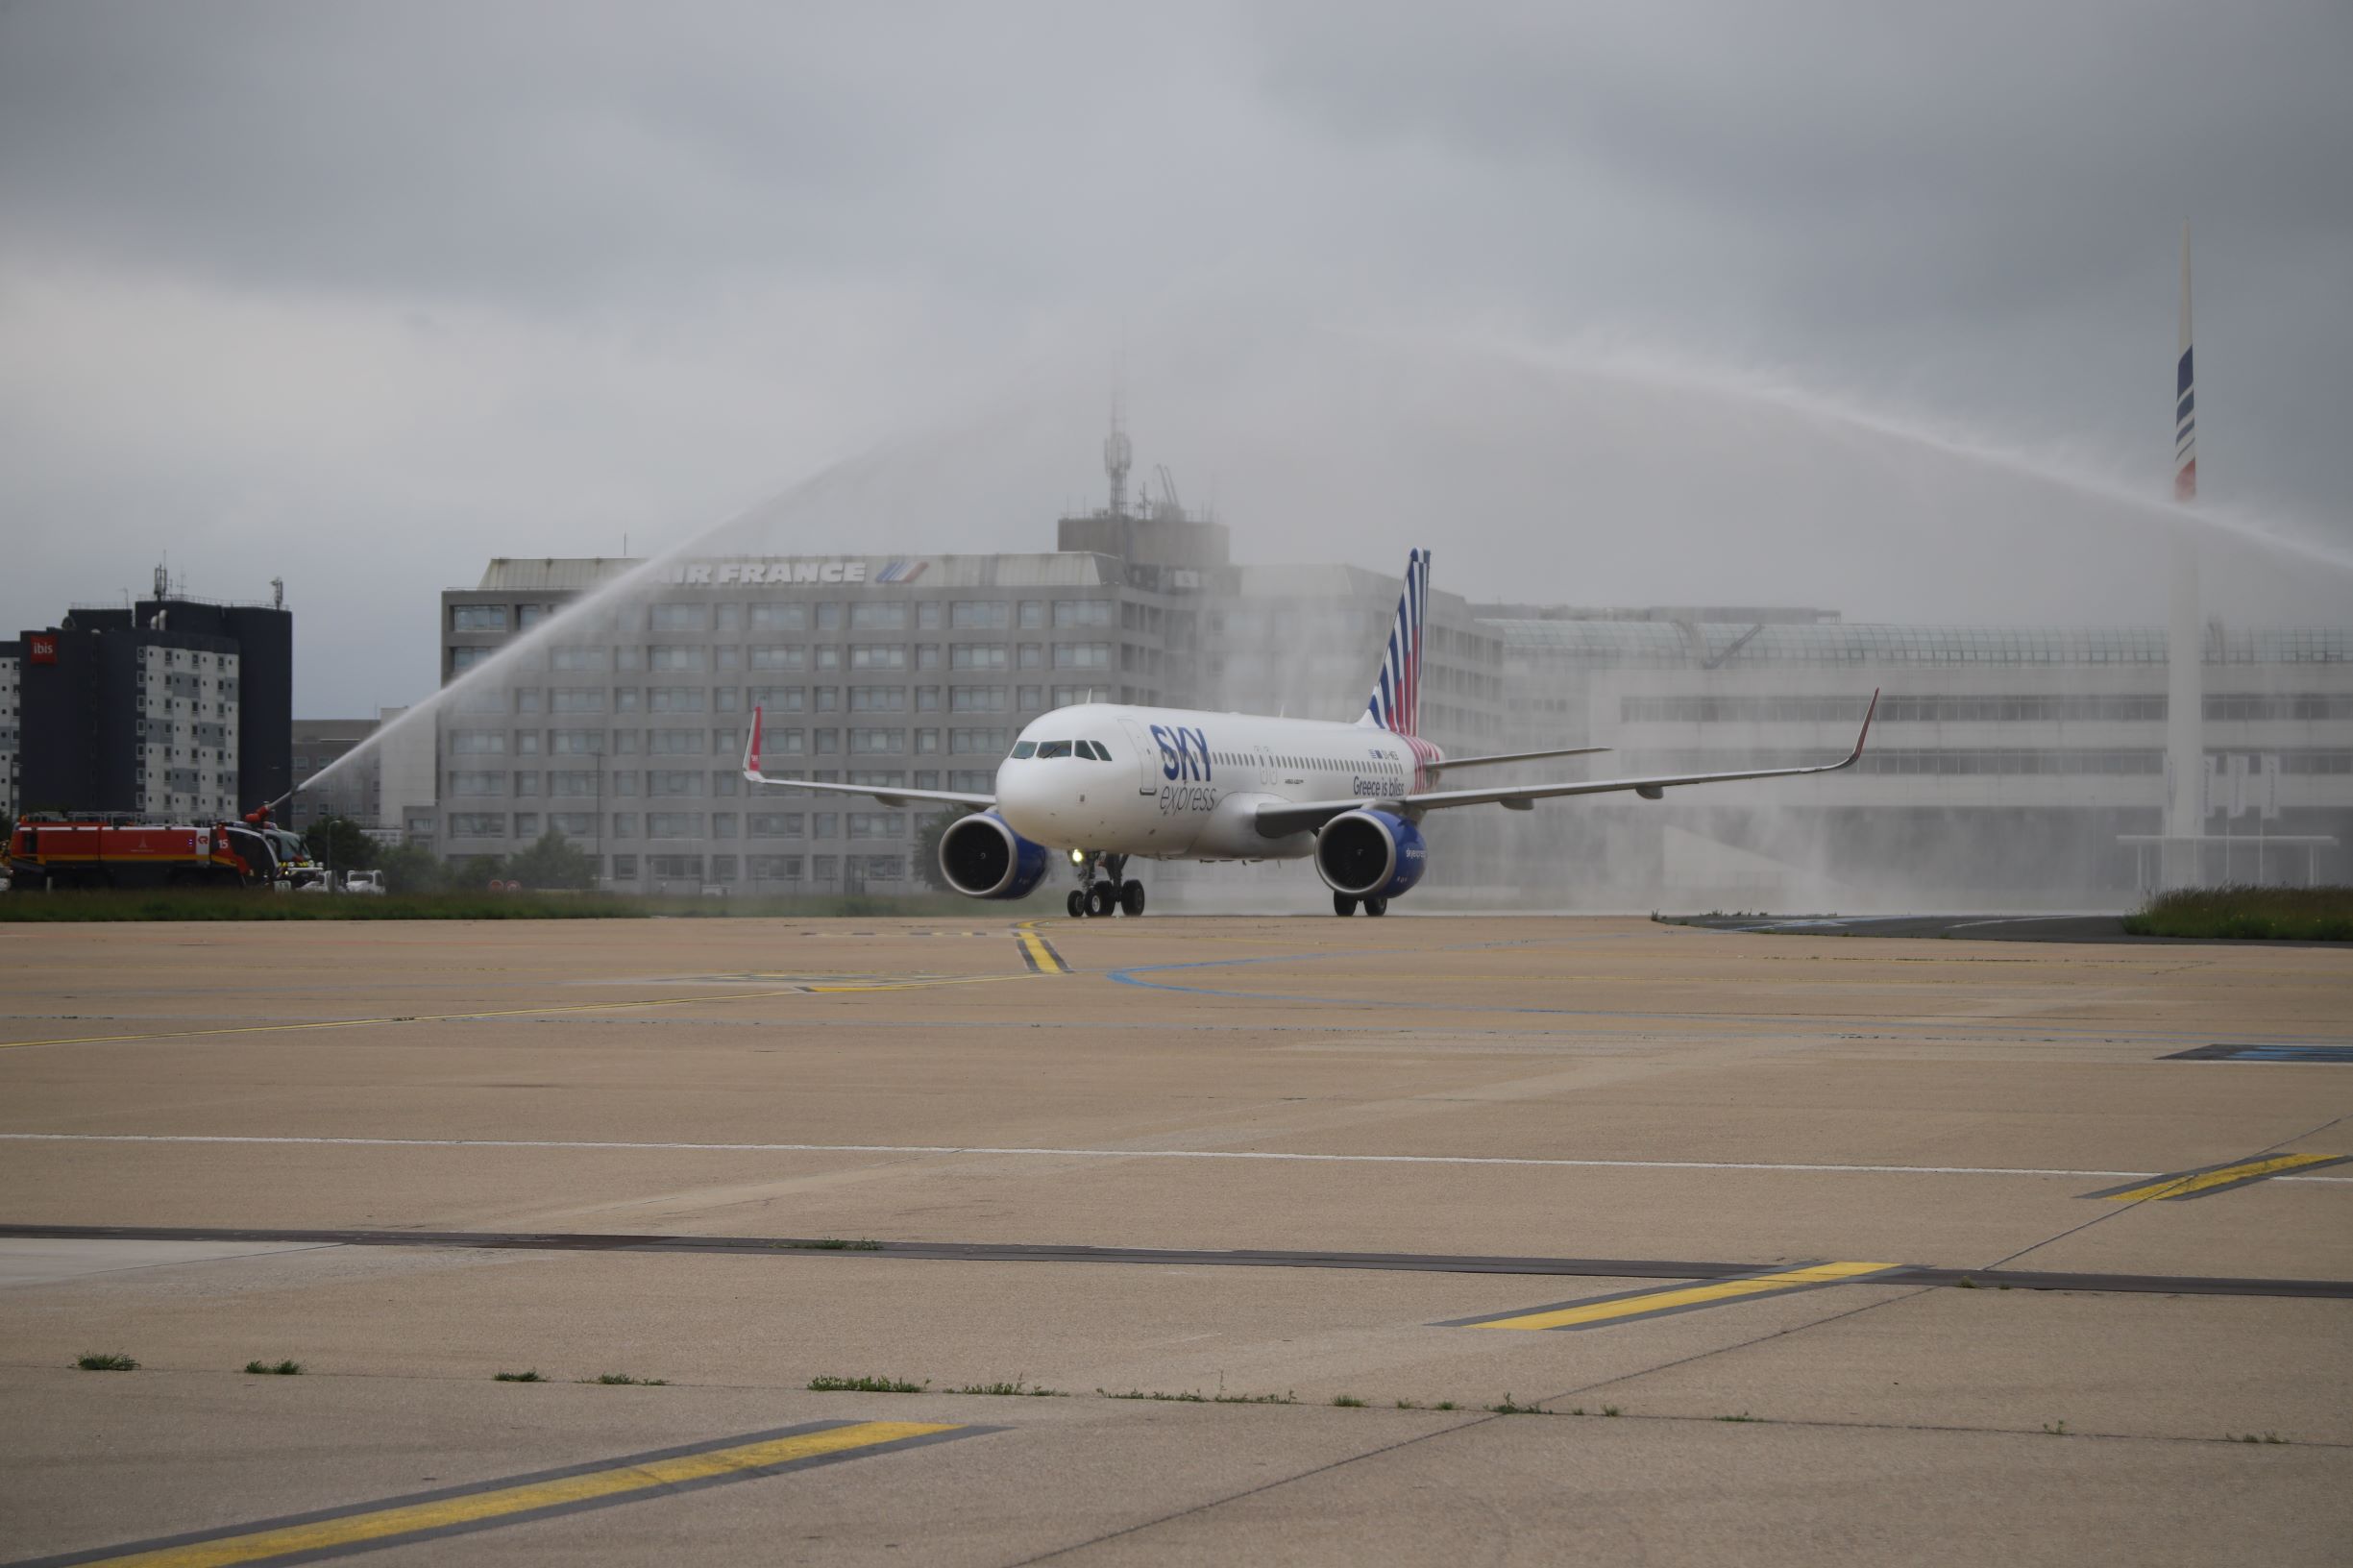 SKY express: Direct flights Athens to Paris have started